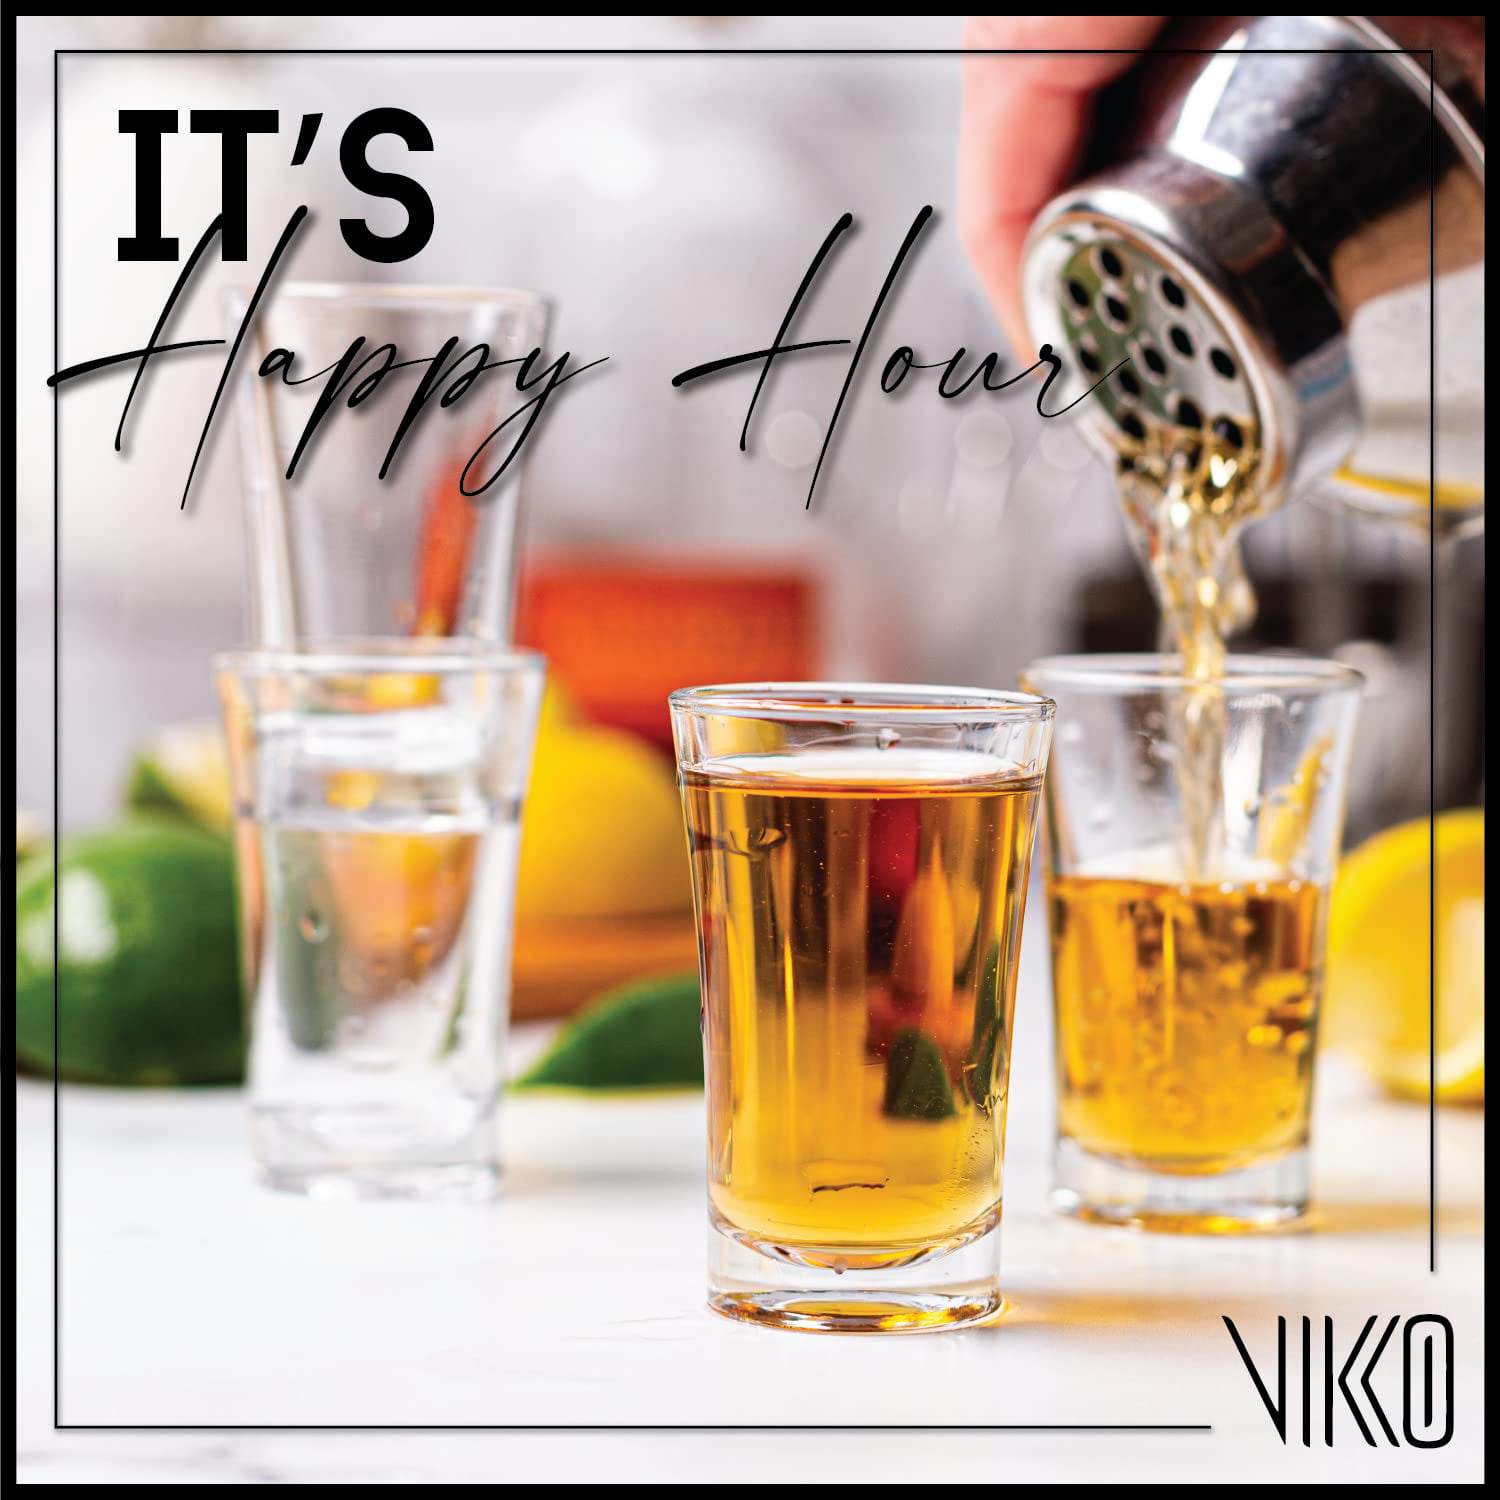 Vikko 3.5 Ounce Shot Glasses, Set of 6 Small Liquor and Spirit Glasses, Durable Tequila Bar Glasses for Alcohol and Espresso Shots, 6 Piece Large